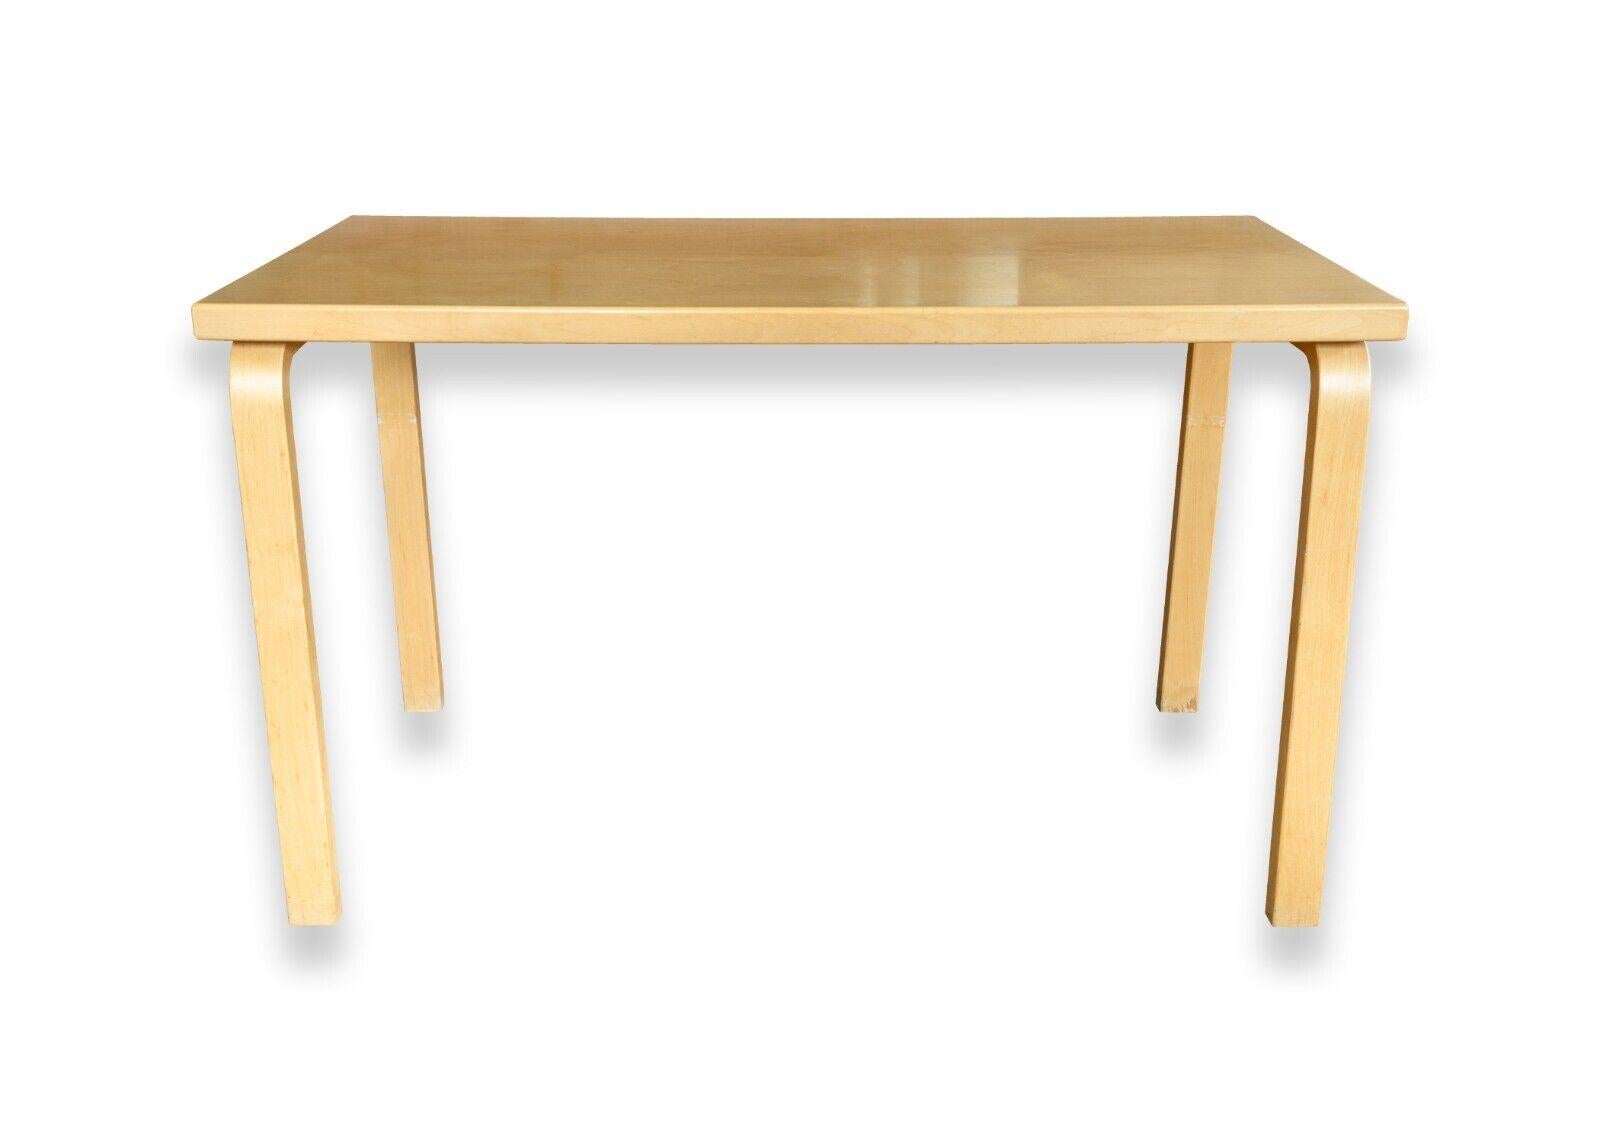 A Alvar Aalto 81B birch desk table for ICF. This lovely little accent table features a very simple, but stunning design featuring an all birch wood construction and a lacquered finish. The simplicity of this table is where it shines. The four legs